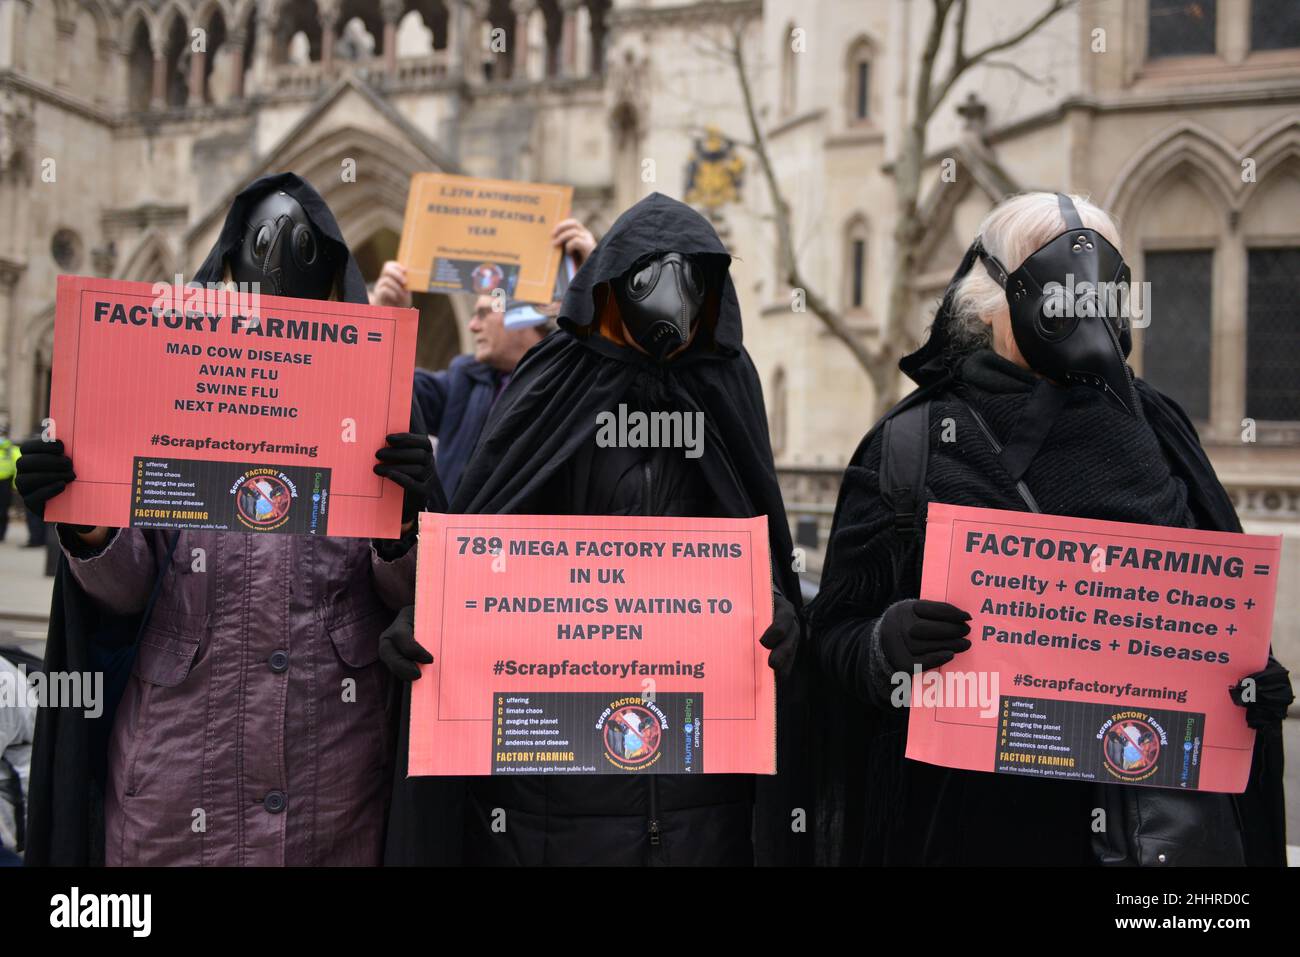 Animal rights activists wearing hazmat suits and splashed with fake blood gathered outside the Royal Courts of Justice in protest against factory farming. The Scrap Factory Farming group launched its legal challenge against DEFRA for failing to take sufficient preventive measures against the known pandemic risks of factory farming. Stock Photo